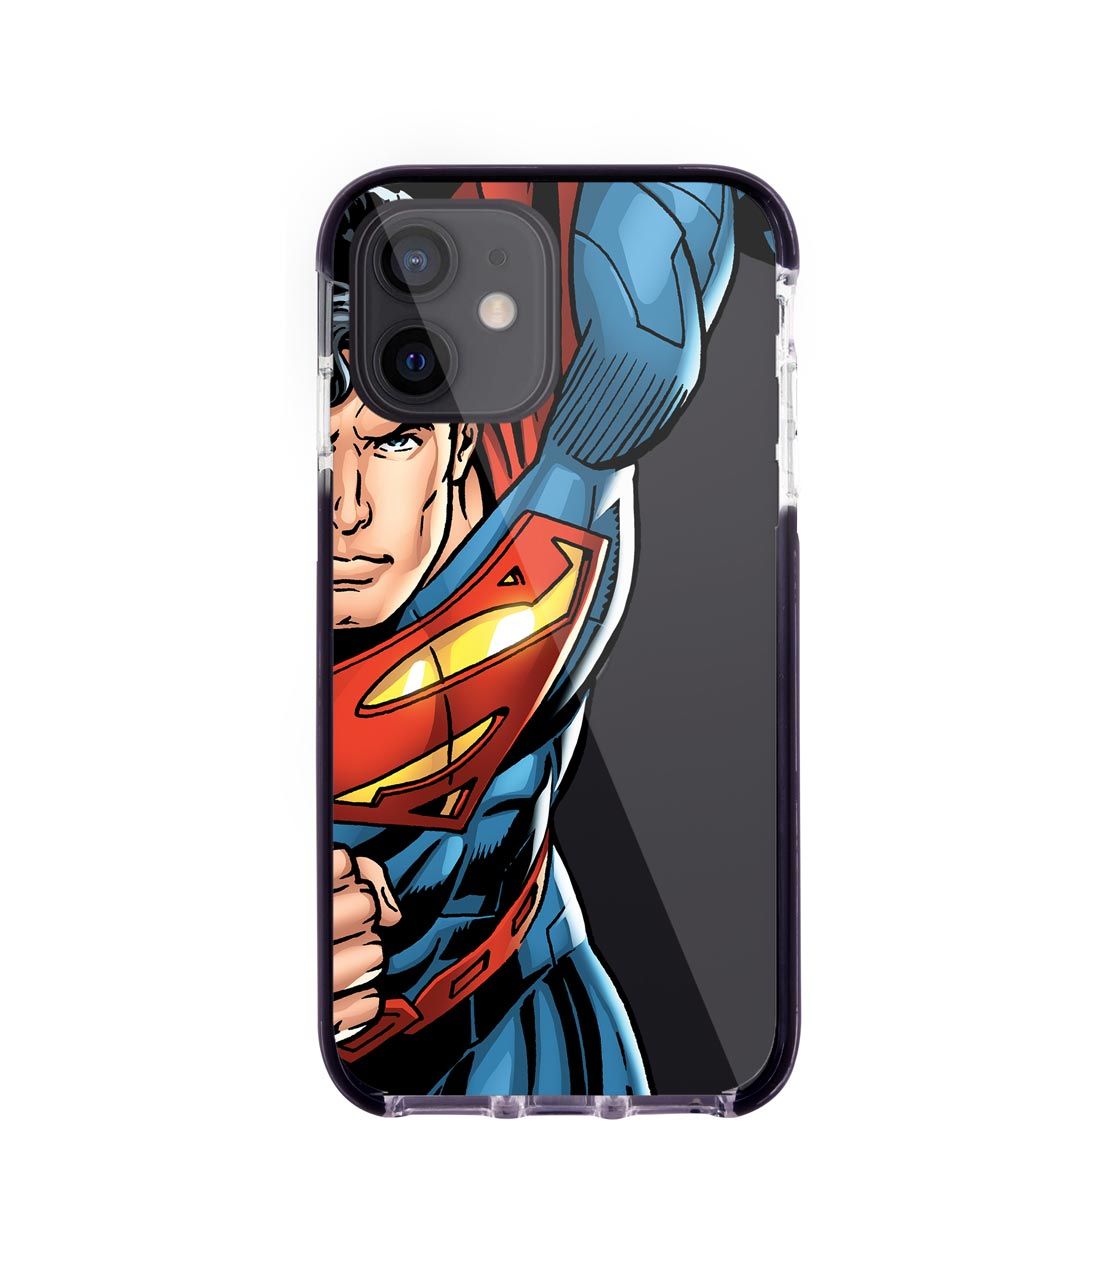 Speed it like Superman - Extreme Case for iPhone 12 Mini